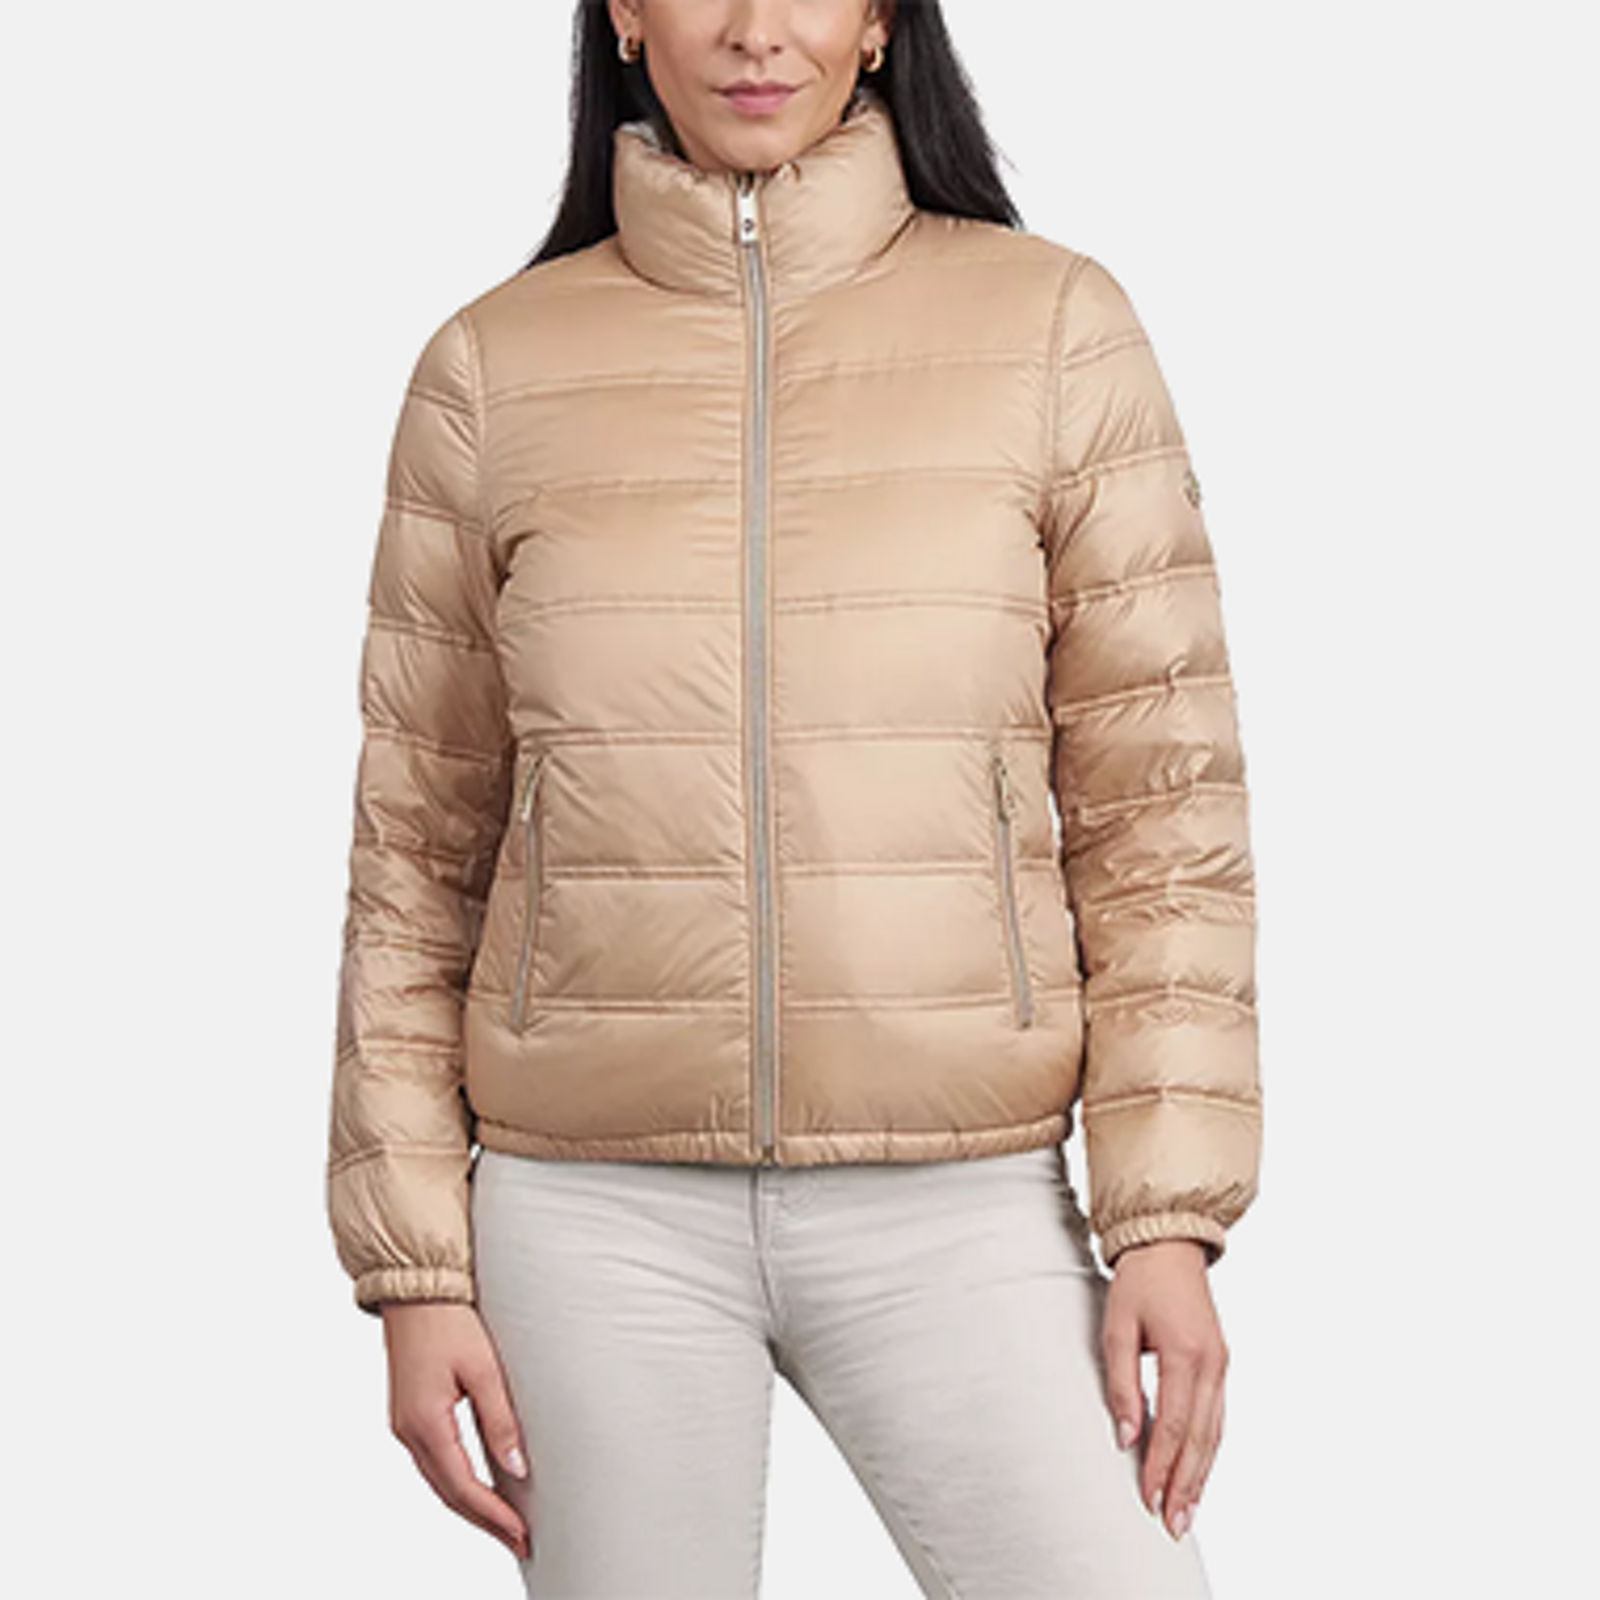 Clearance/Closeout Coats & Jackets For Women - Macy's